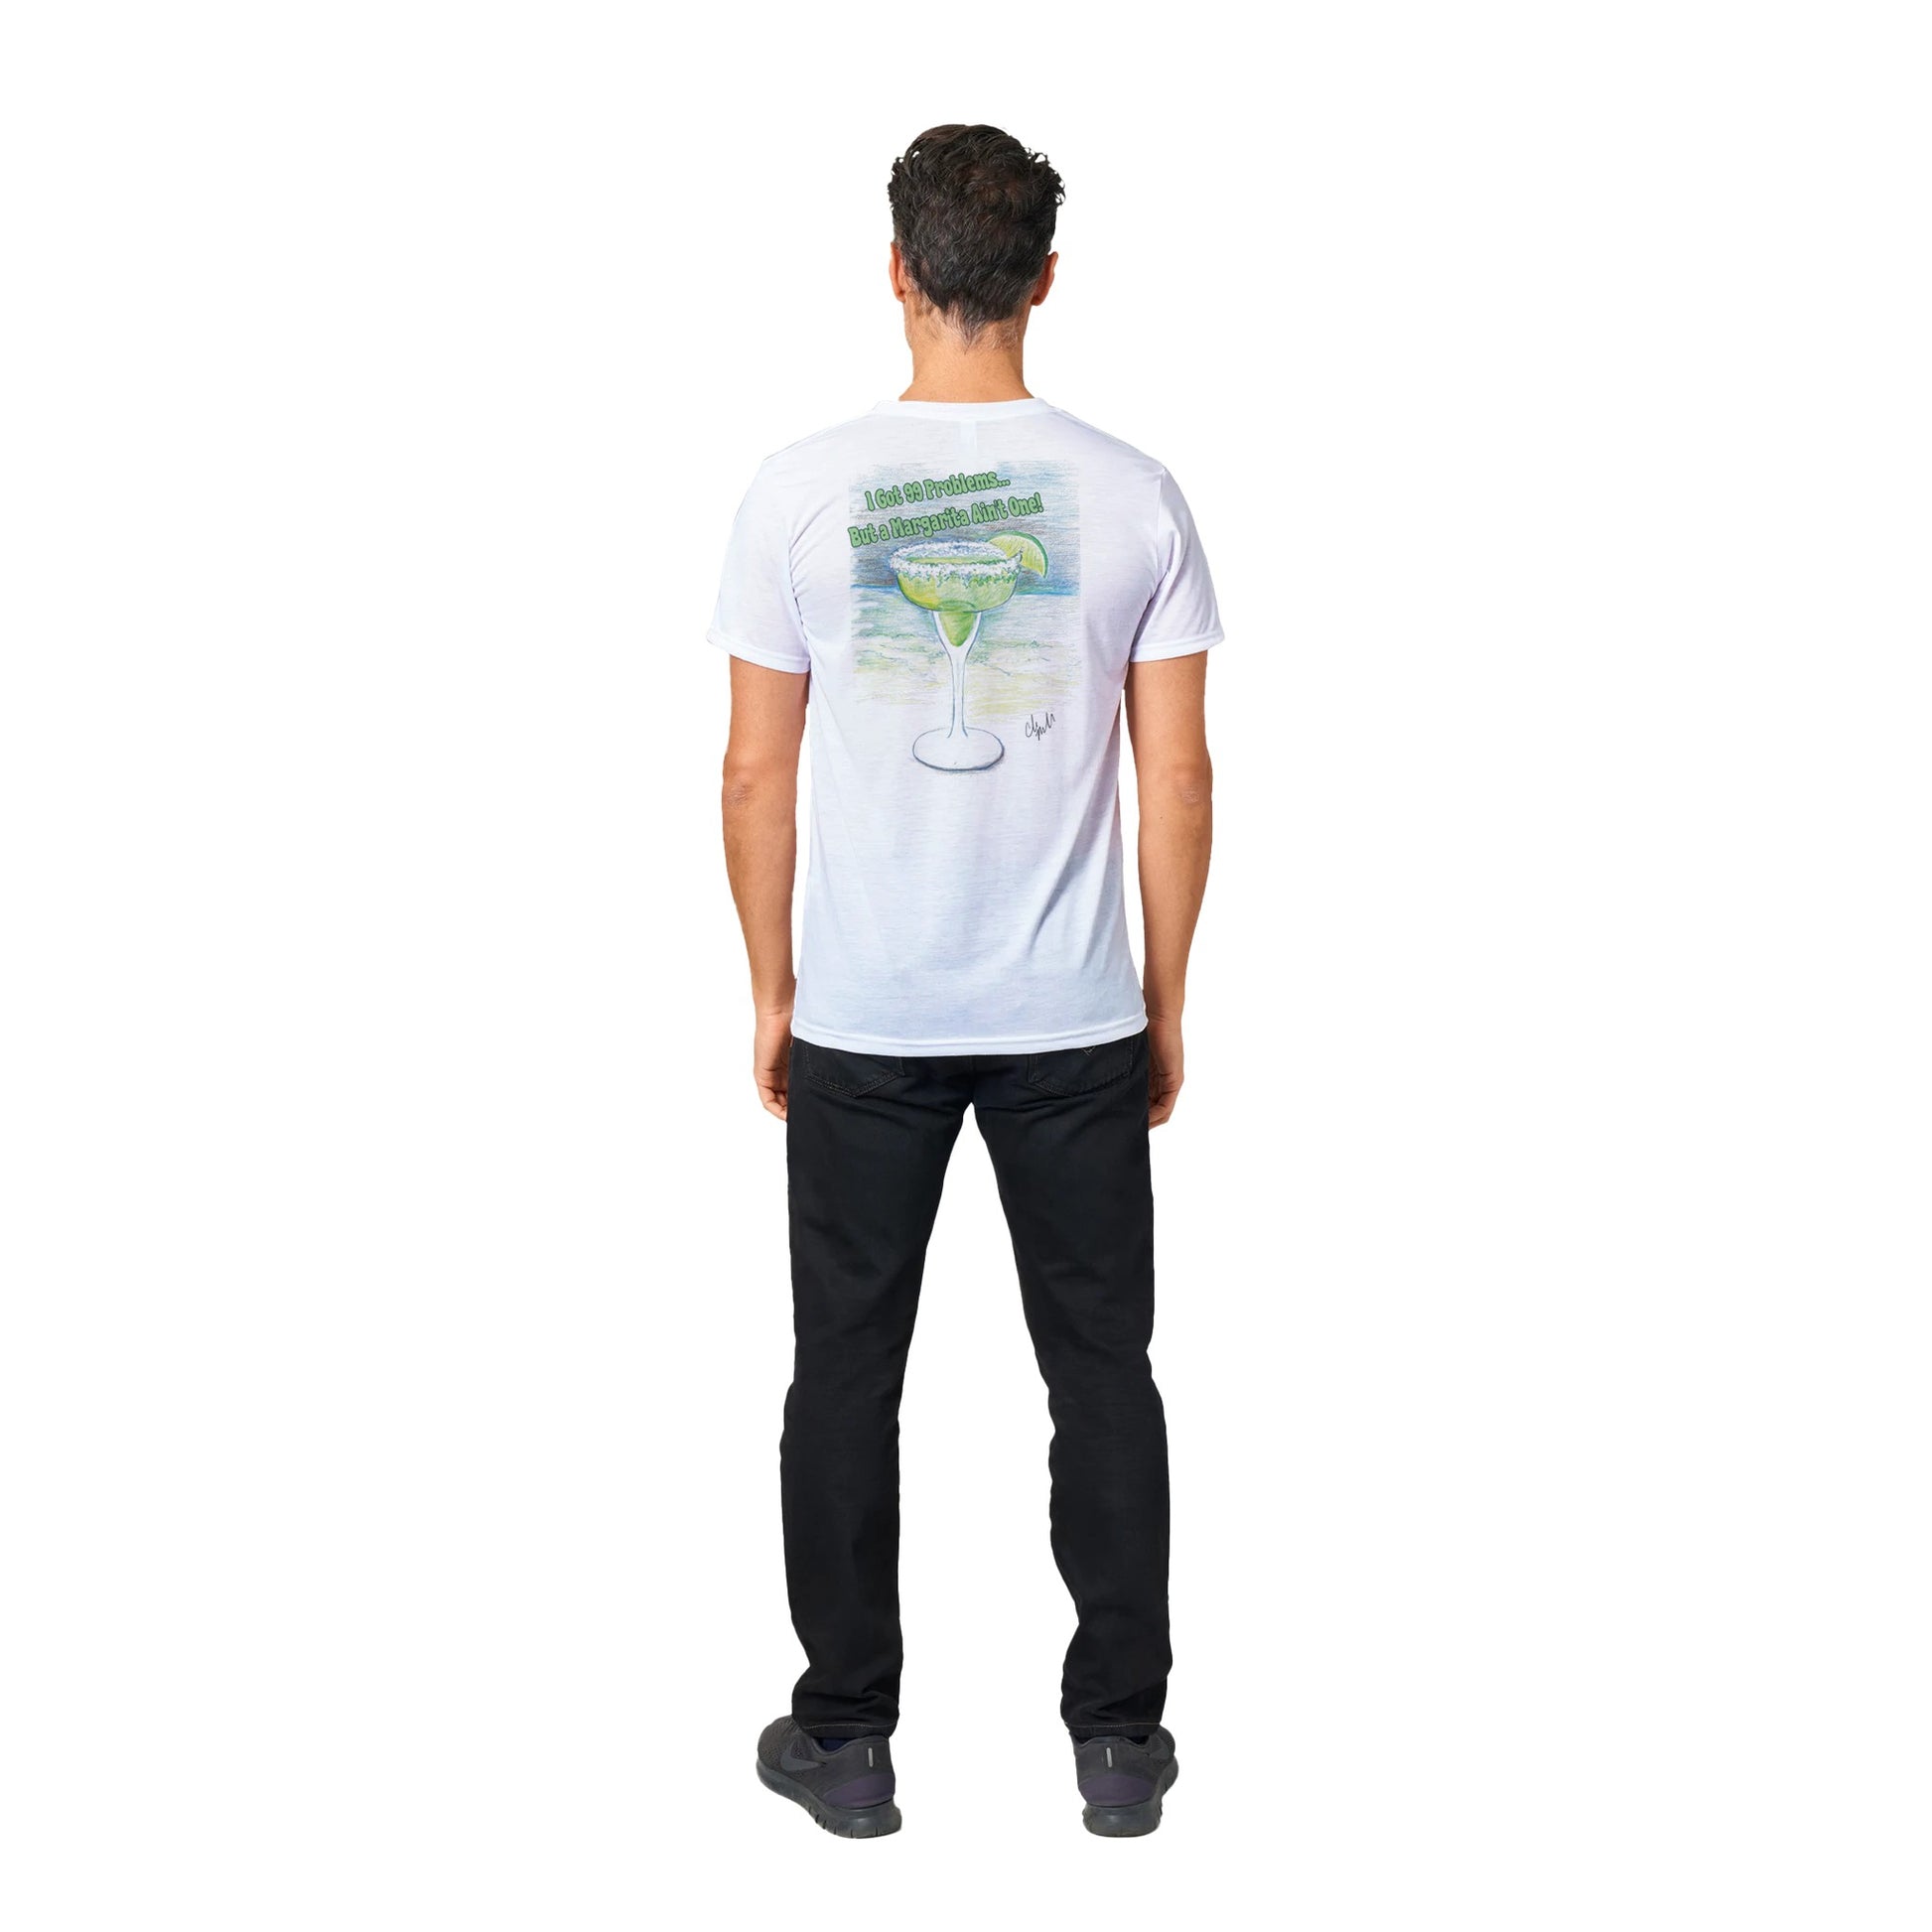 White Performance Unisex Crewneck t-shirt with original artwork and motto I Got 99 Problems But a Margarita Aint One on back and Whatya Say logo on front from WhatYa Say Apparel a rear view of short dark-haired male model.